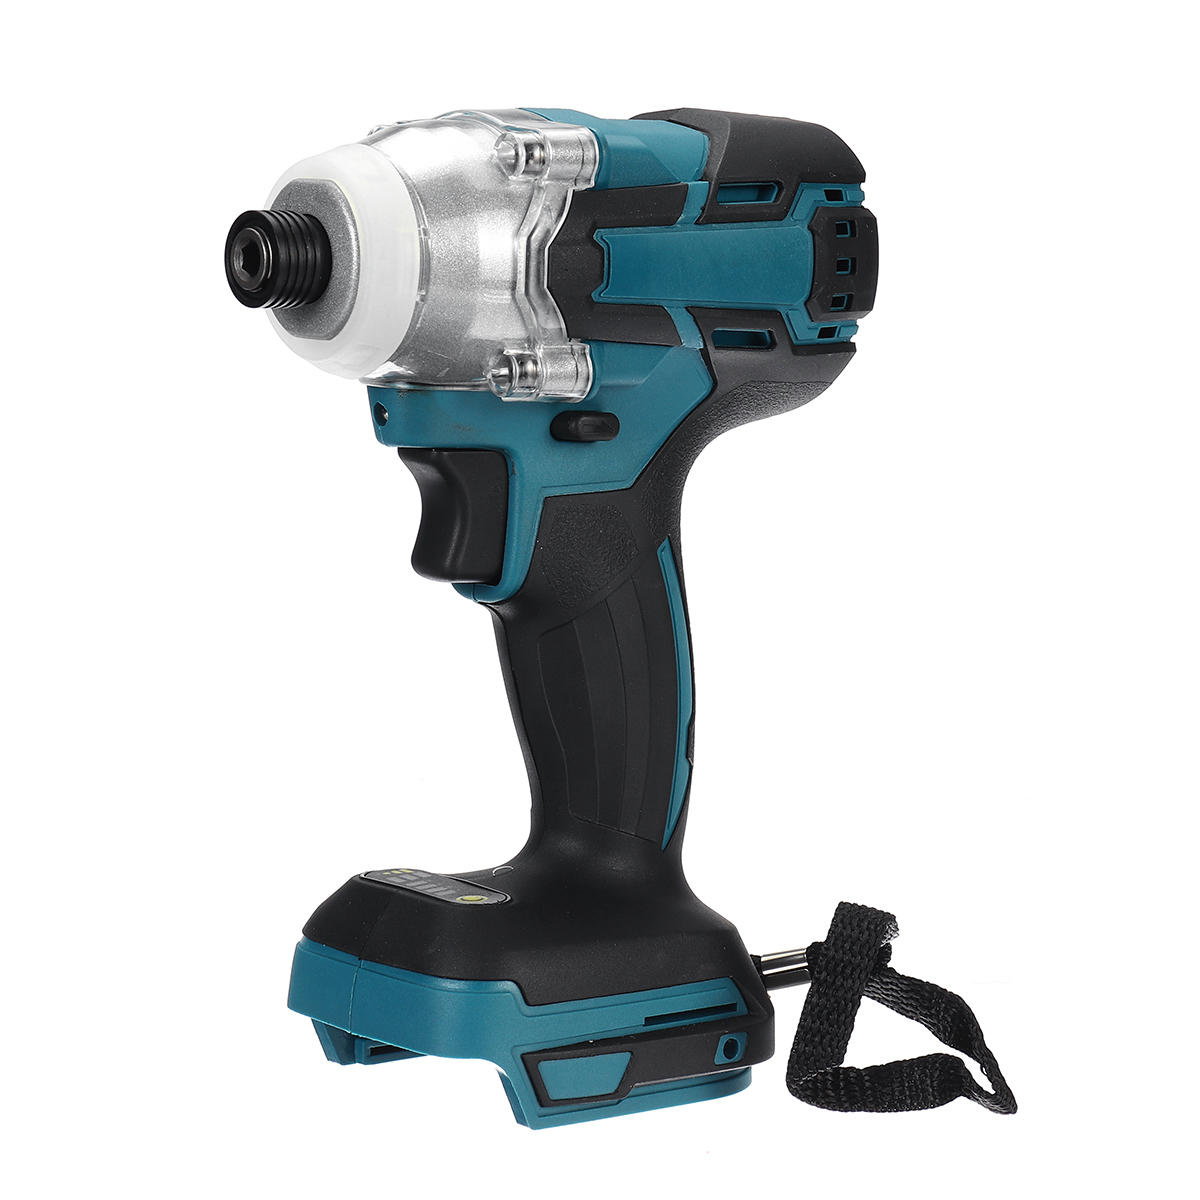 best price,18v,520nm,cordless,brushless,impact,electric,screwdriver,discount